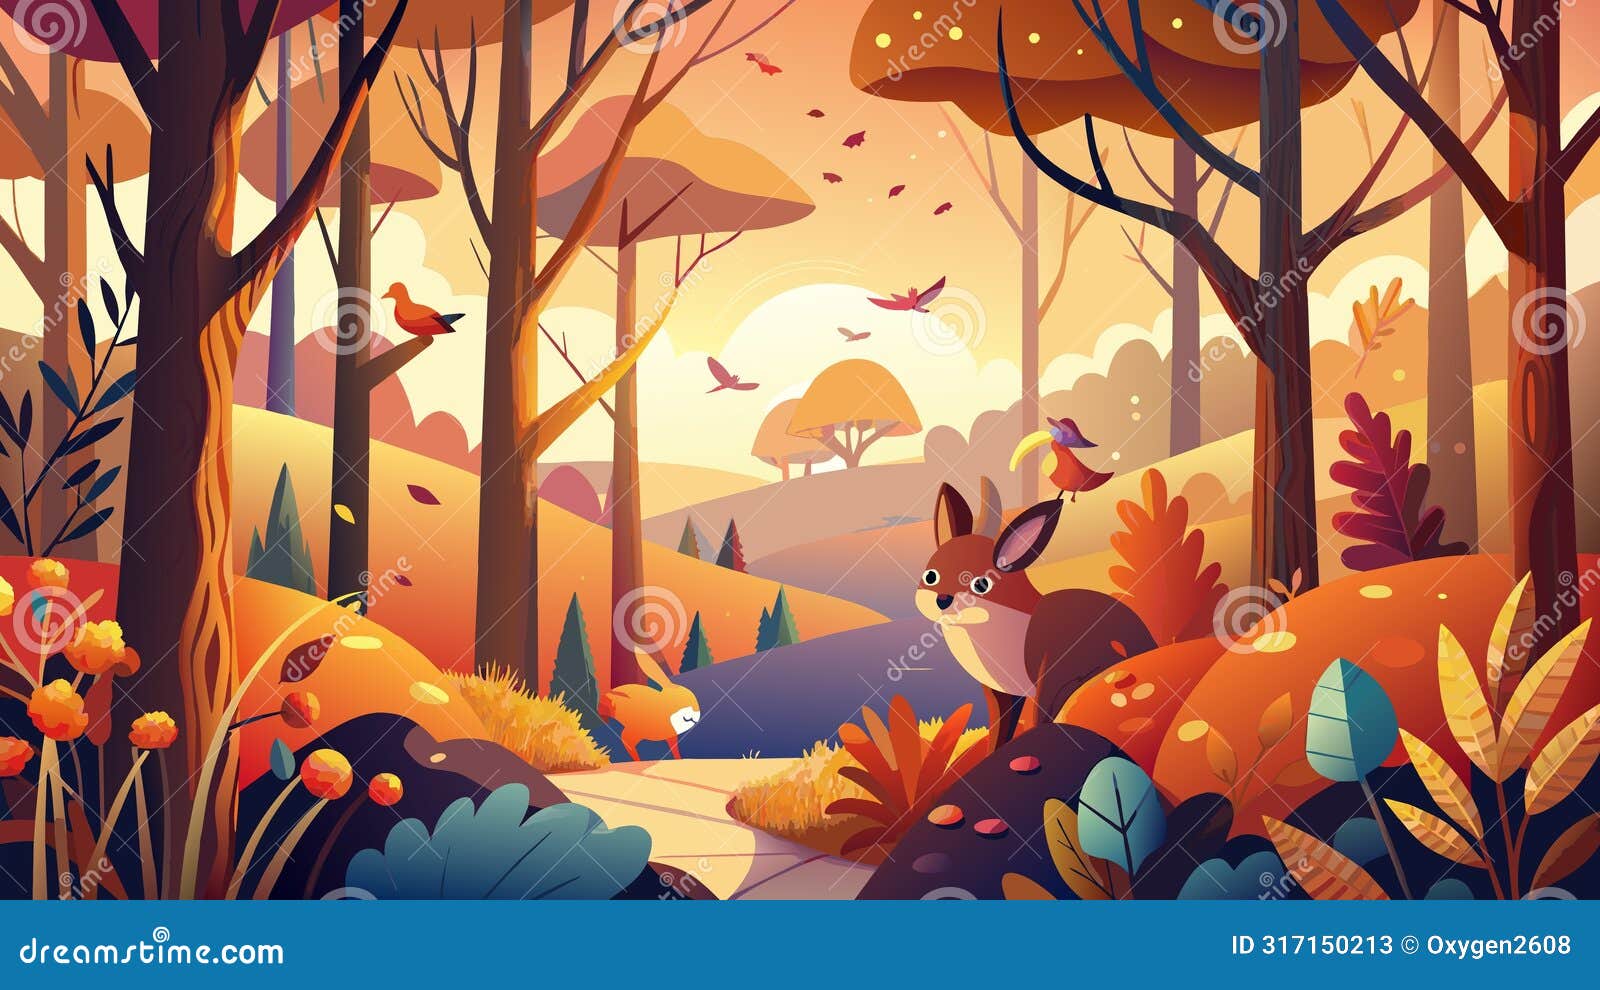 enchanted autumn forest with wildlife and warm hues